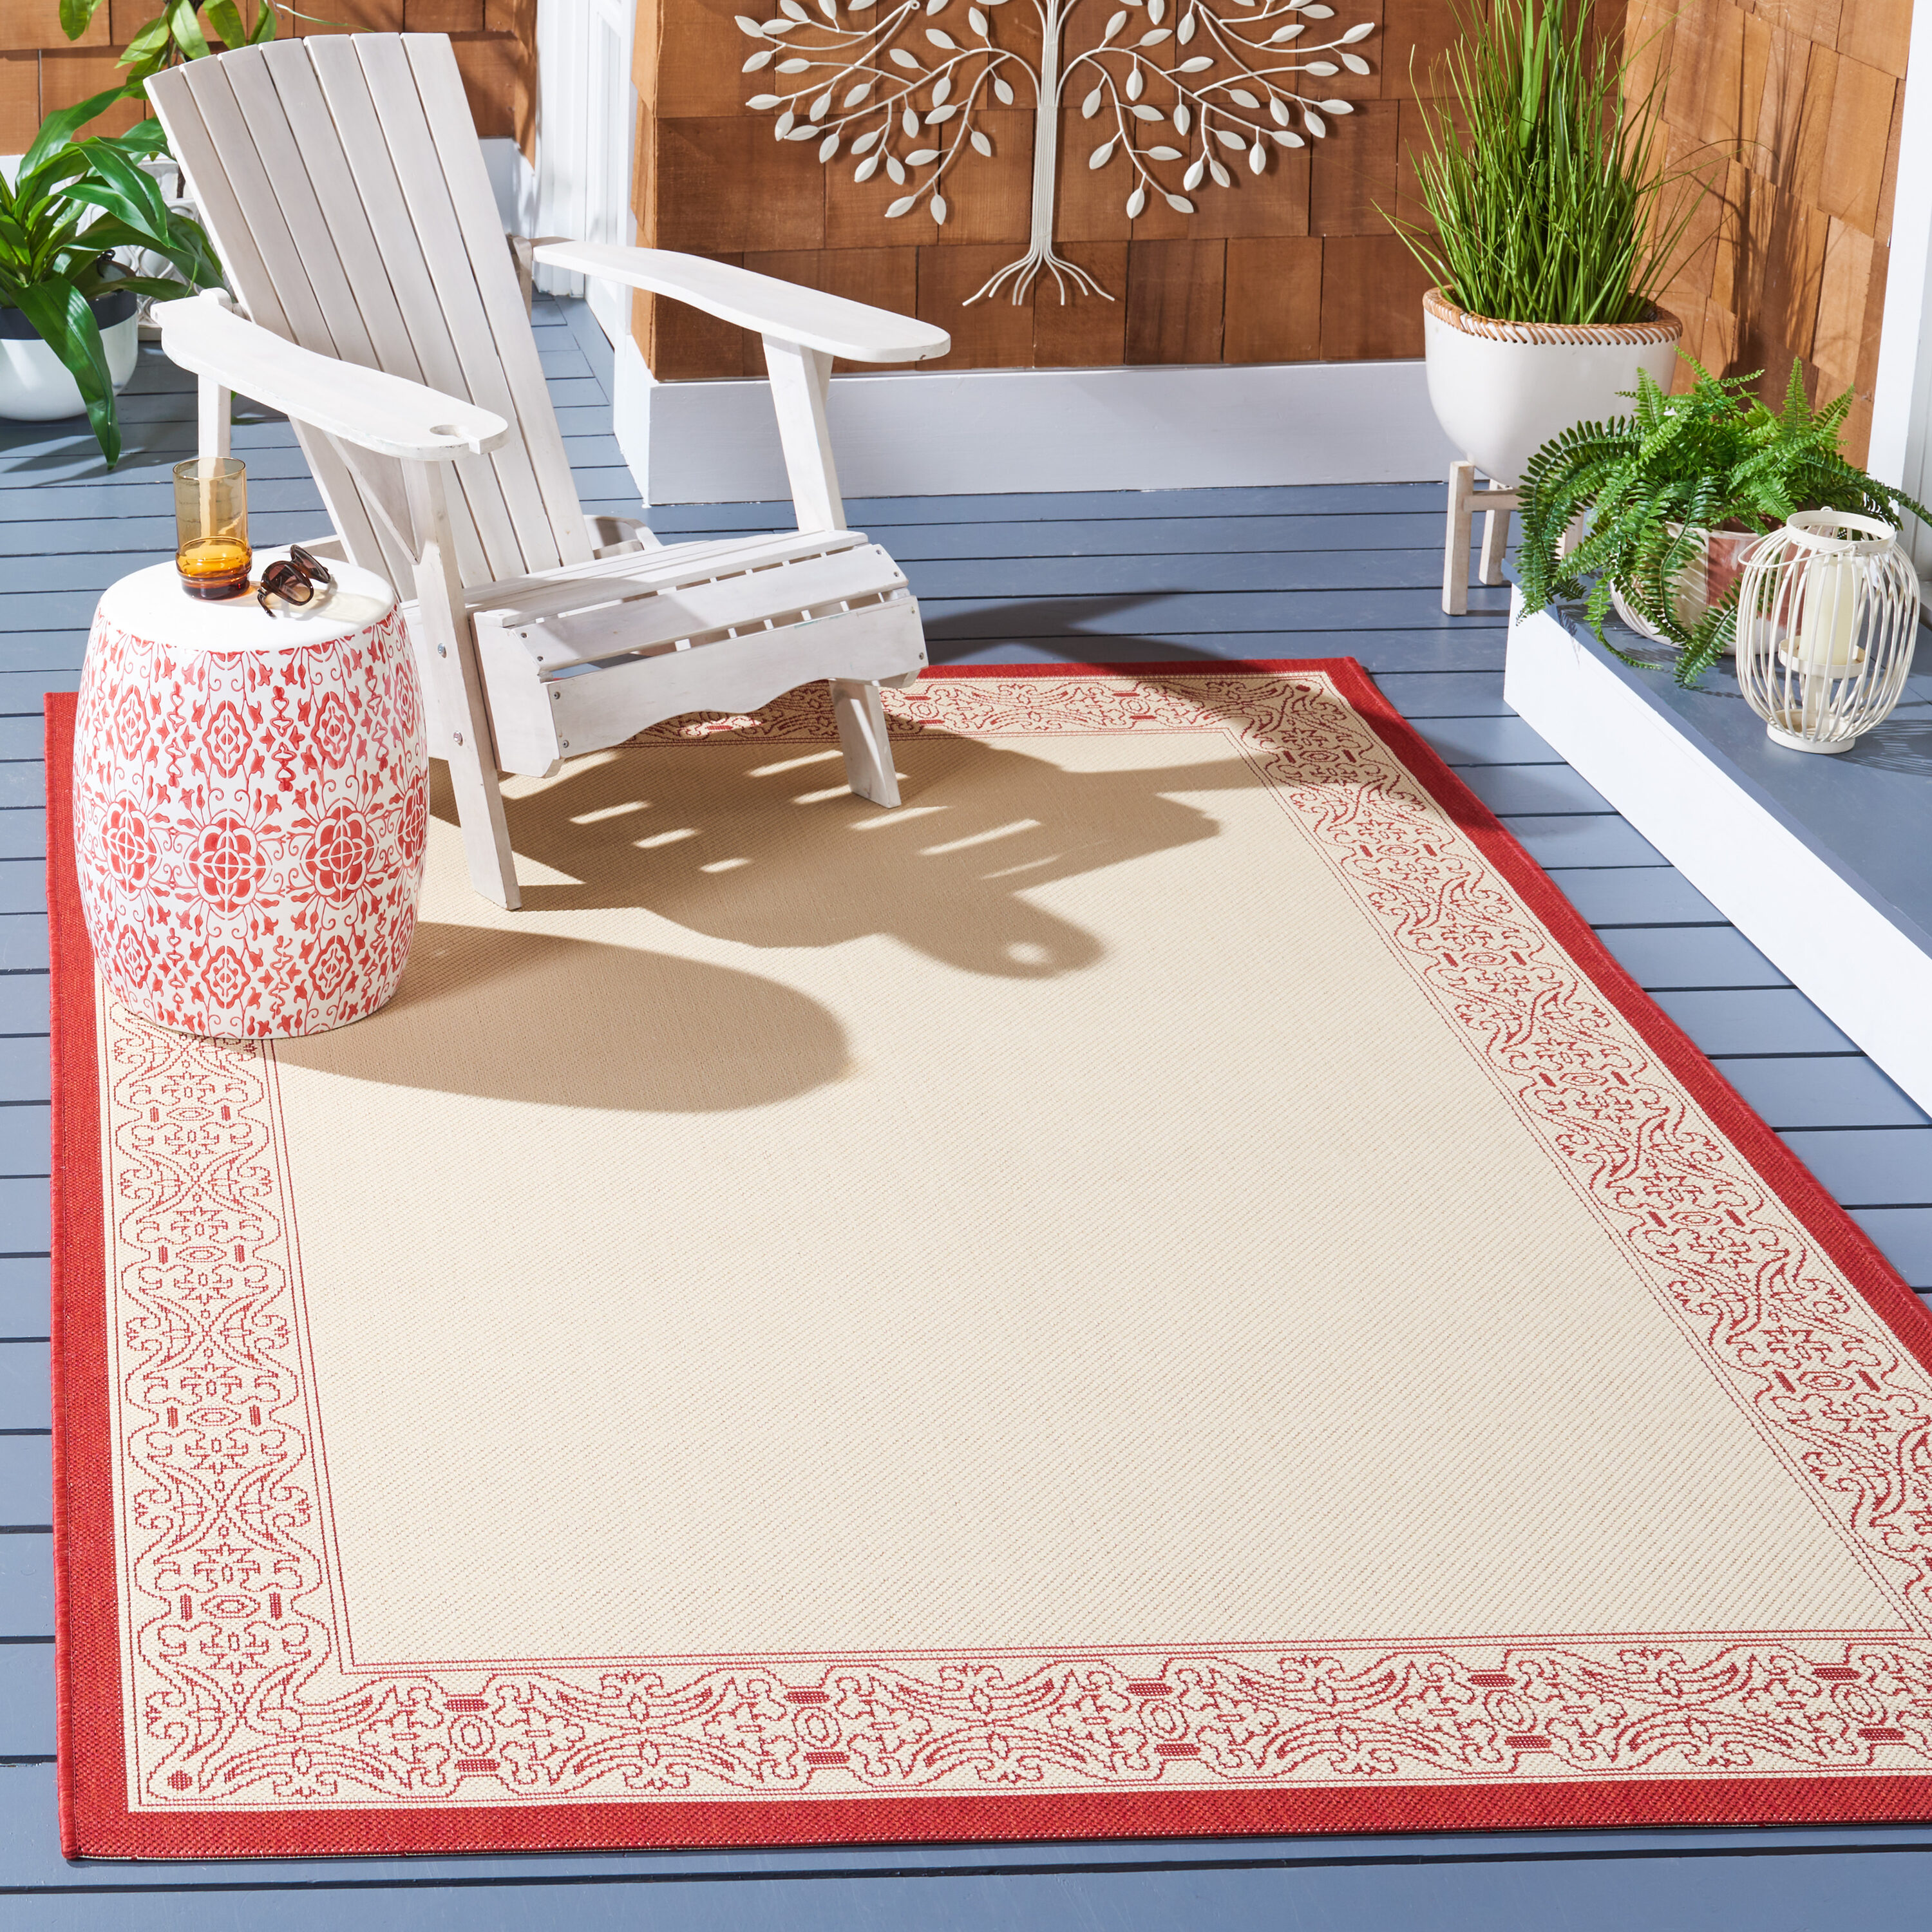 Safavieh Courtyard Gates X 7 Rug the Natural/Red Indoor/Outdoor Square at Area Border Coastal department in 7 Rugs